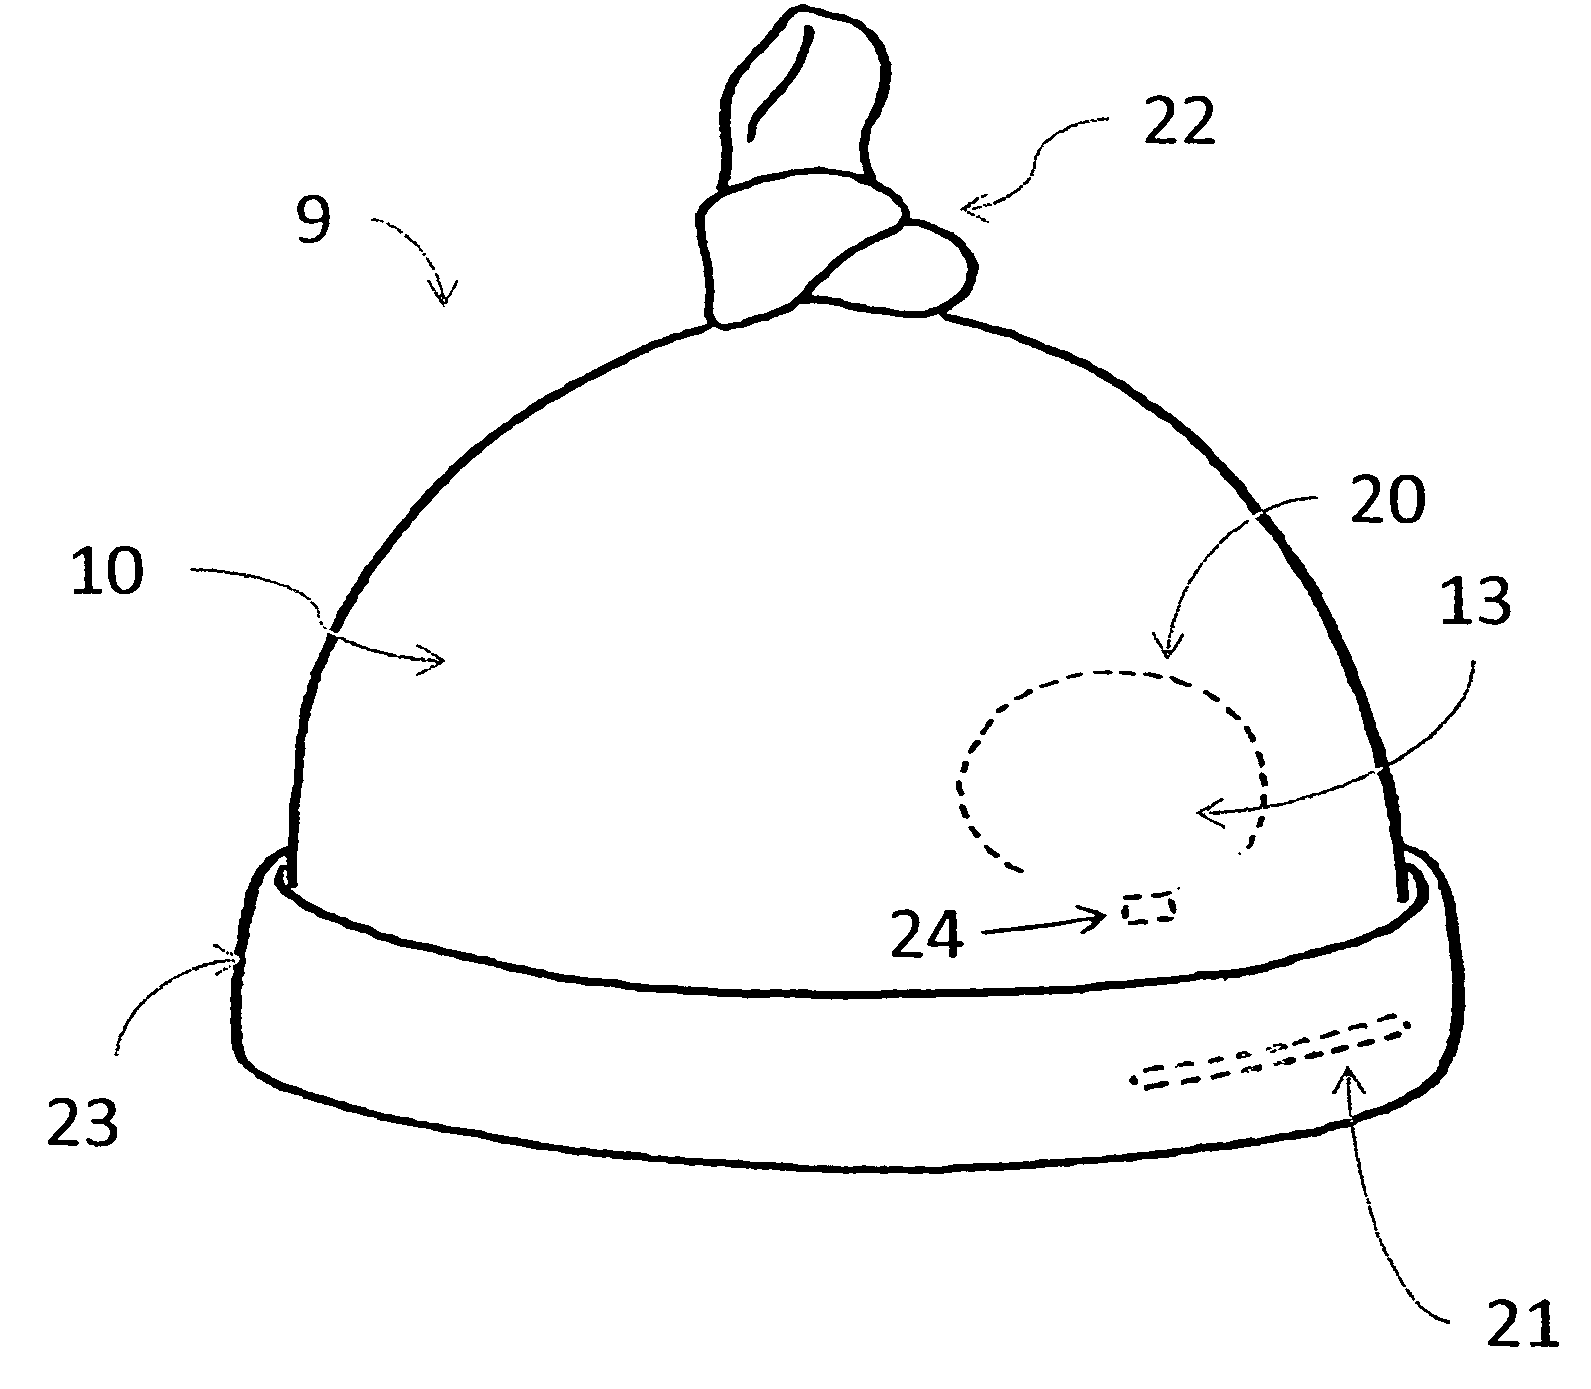 Infant headwear for treating an infant's persistently maintained head position, seen in conditions such as plagiocephaly (baby flat head) and torticollis (wry neck)